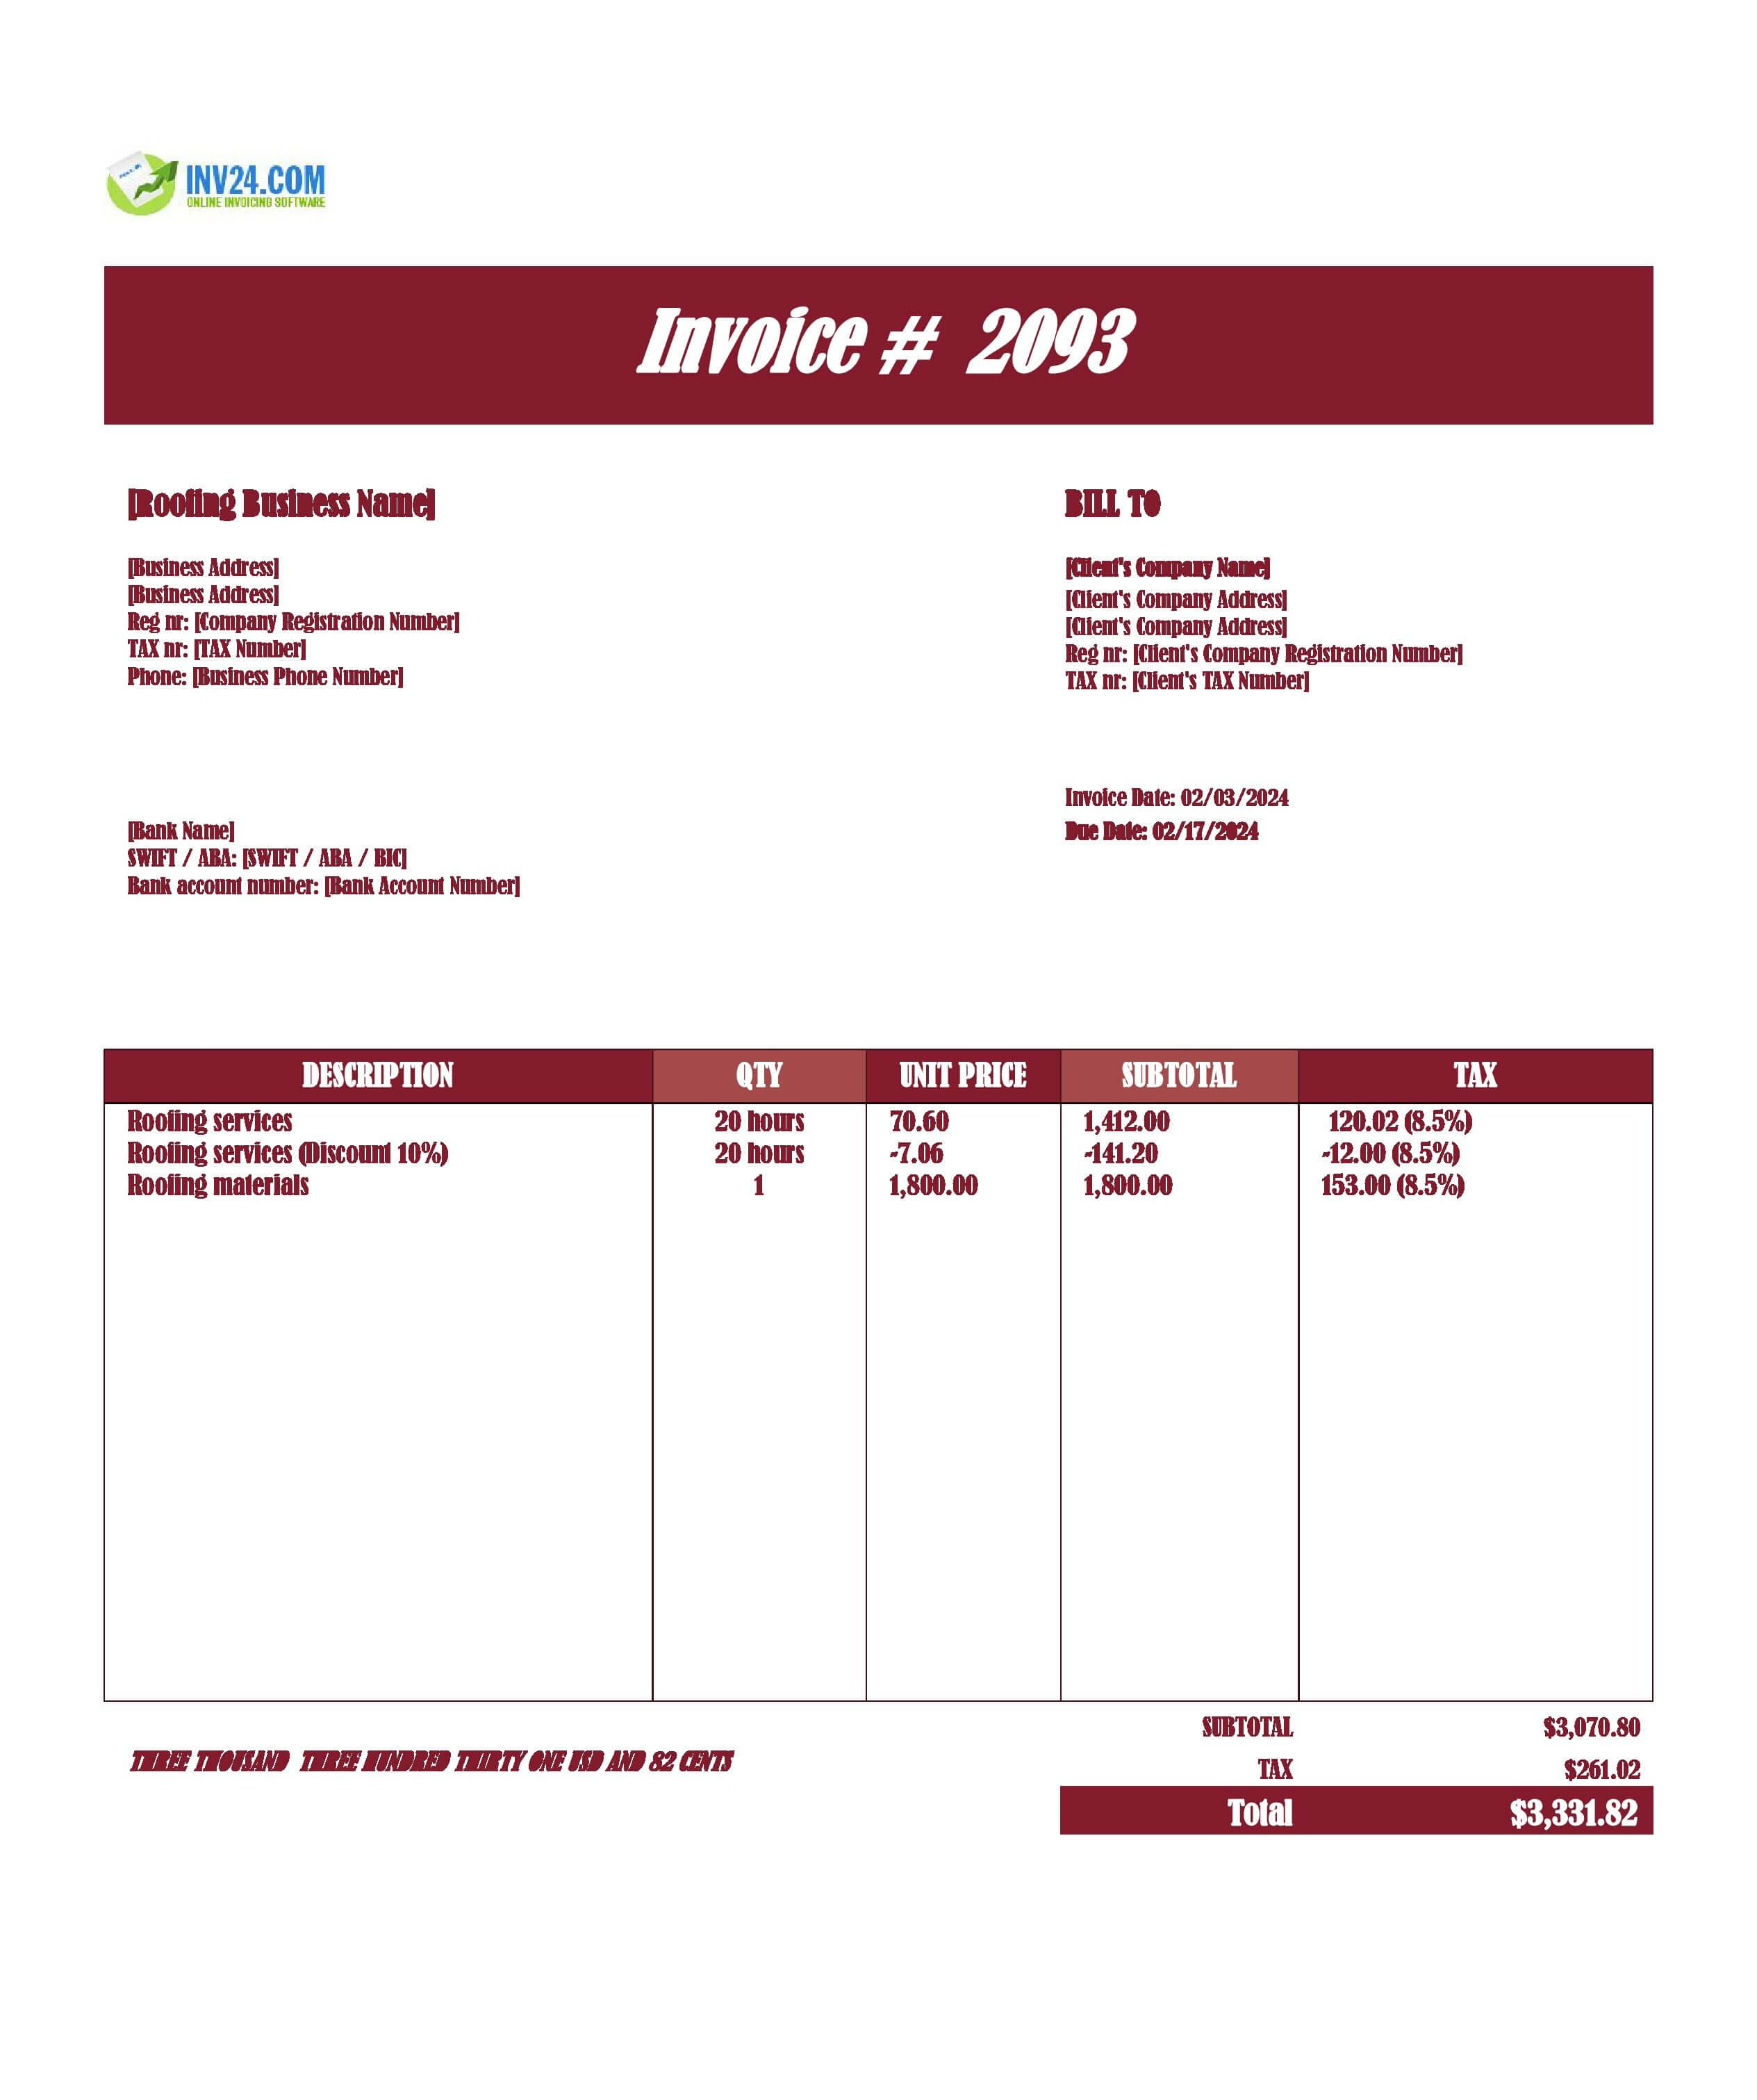 Roofing invoice template